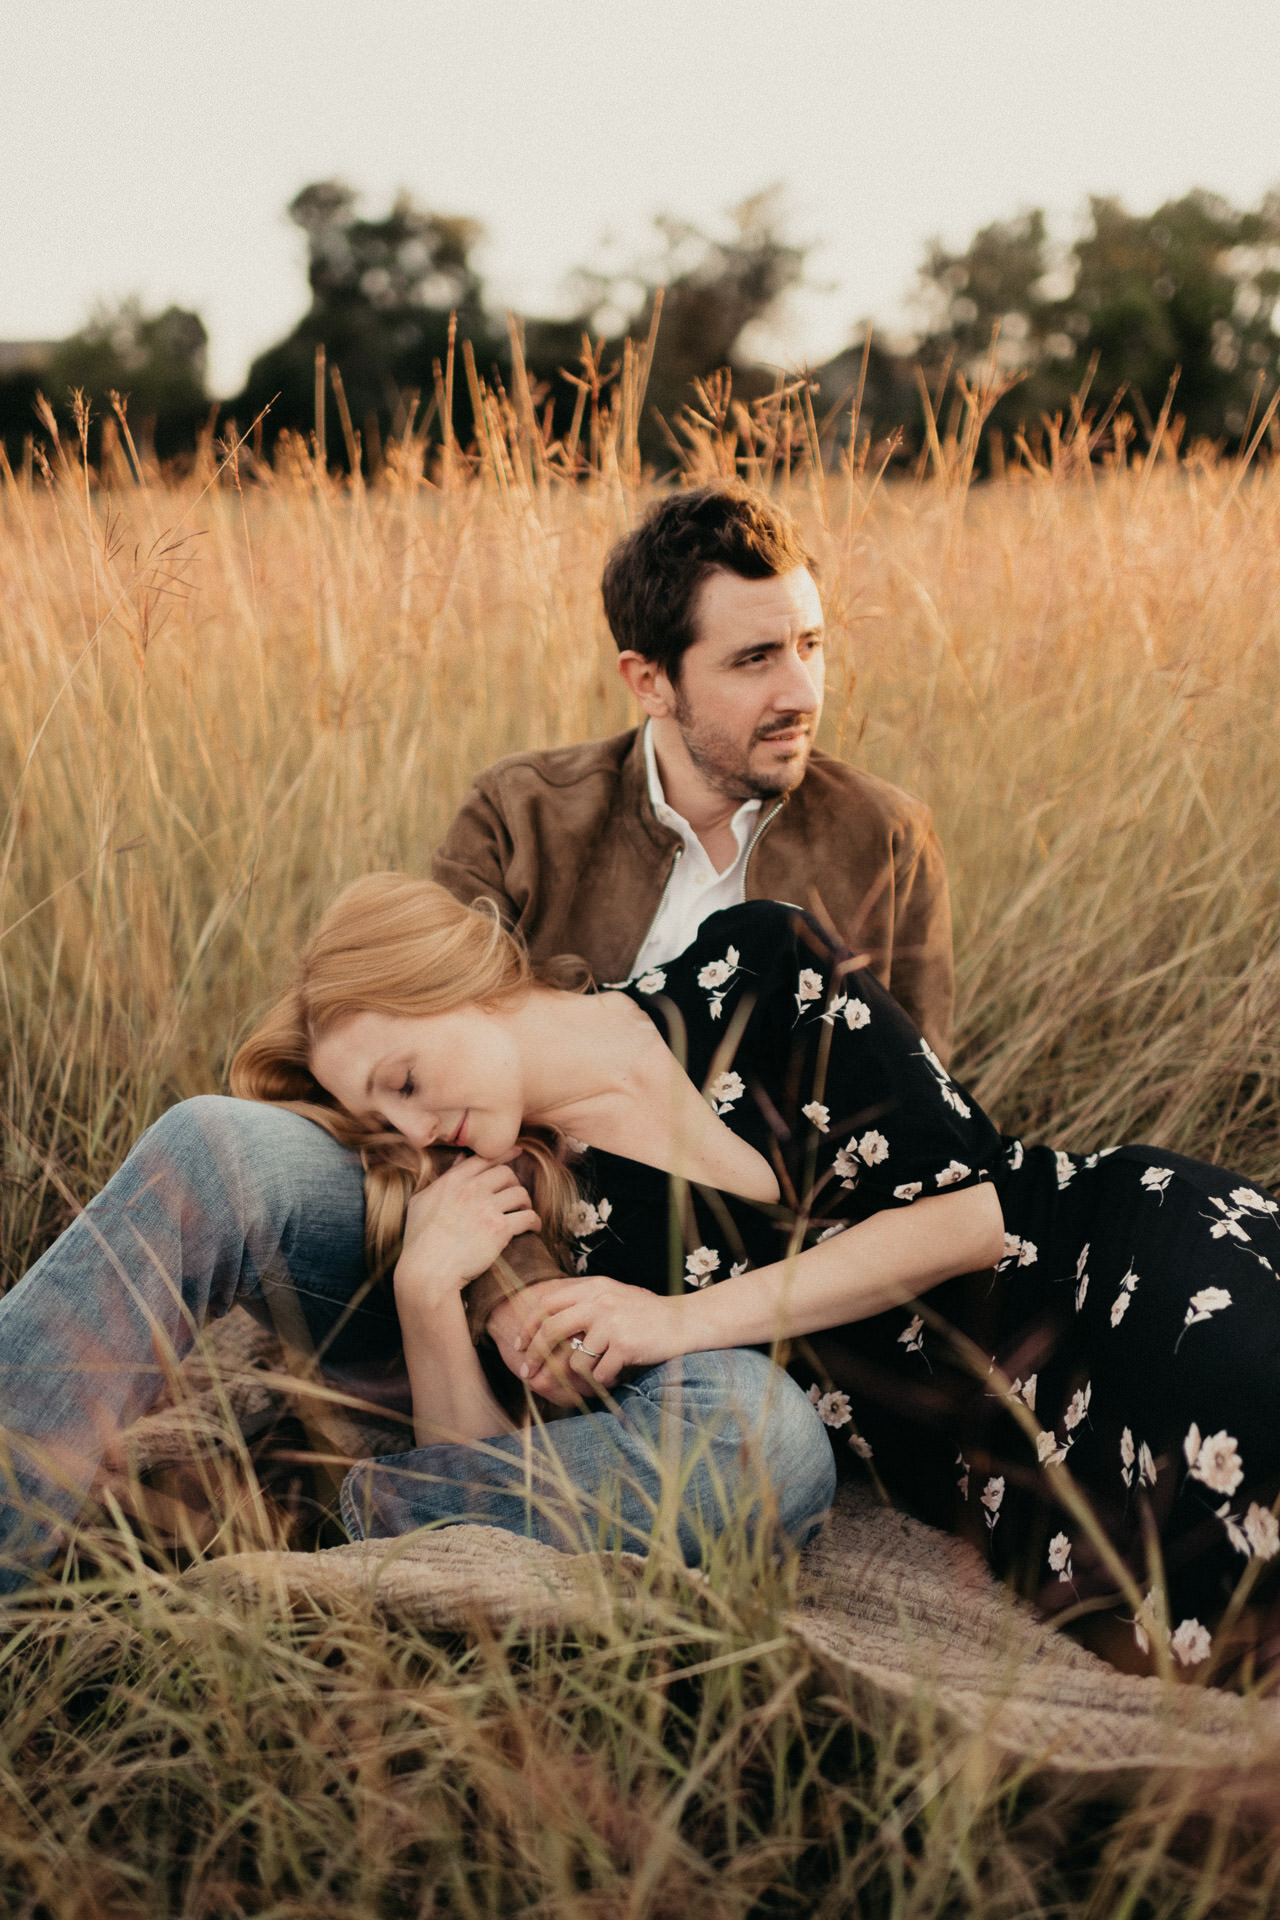 Houston Tall Grass Engagement Session — ROMANTIC, ELEGANT, AND TIMELESS ...